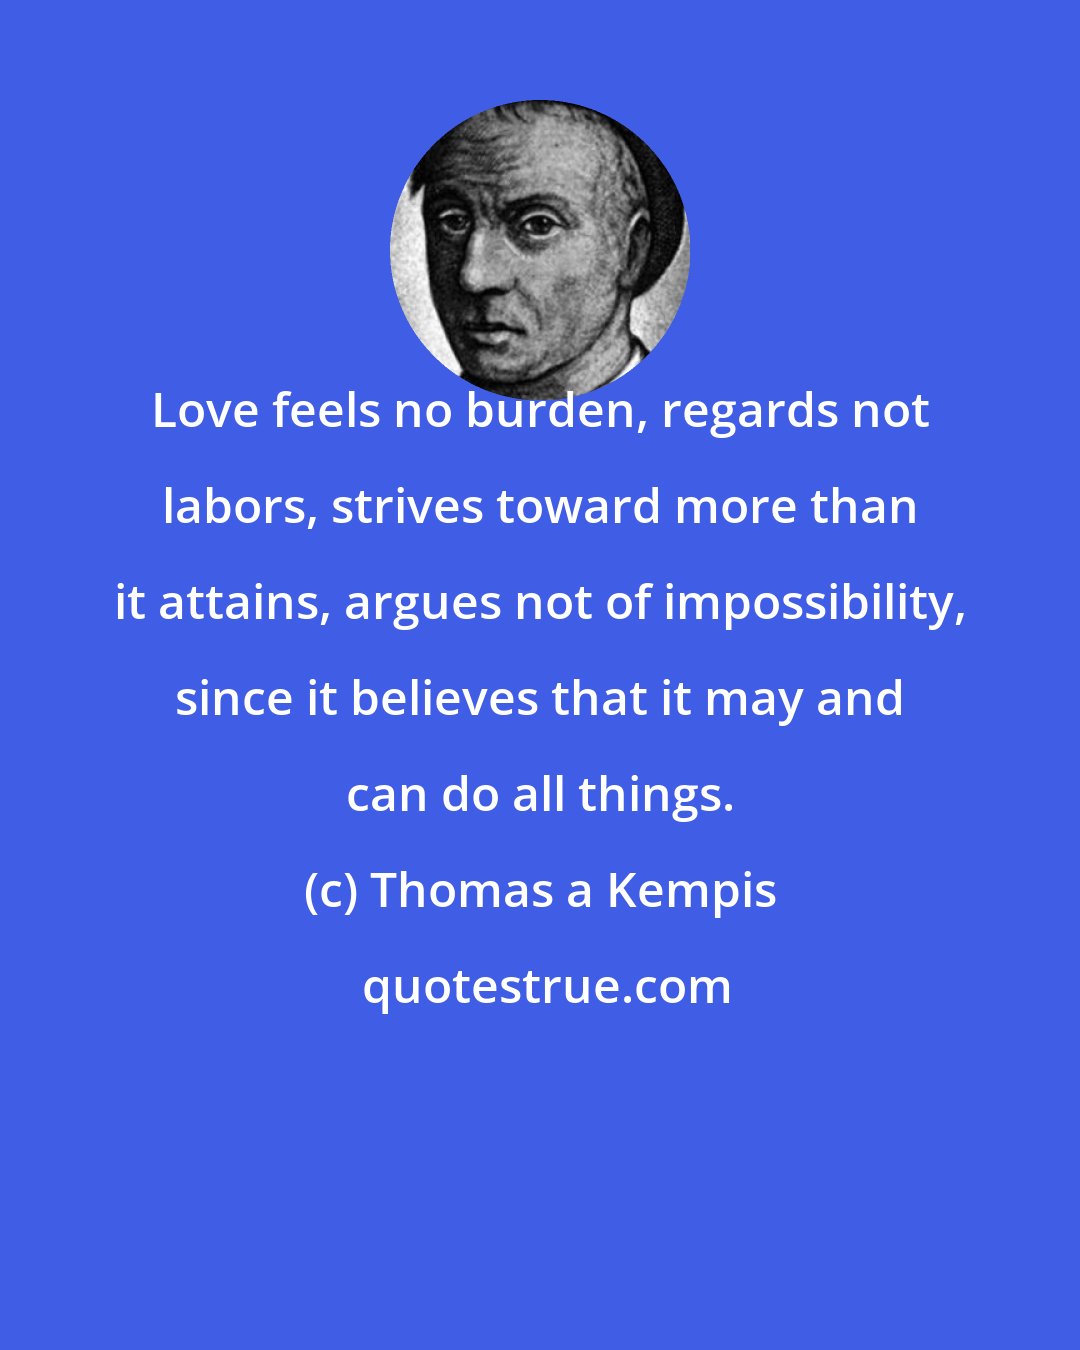 Thomas a Kempis: Love feels no burden, regards not labors, strives toward more than it attains, argues not of impossibility, since it believes that it may and can do all things.